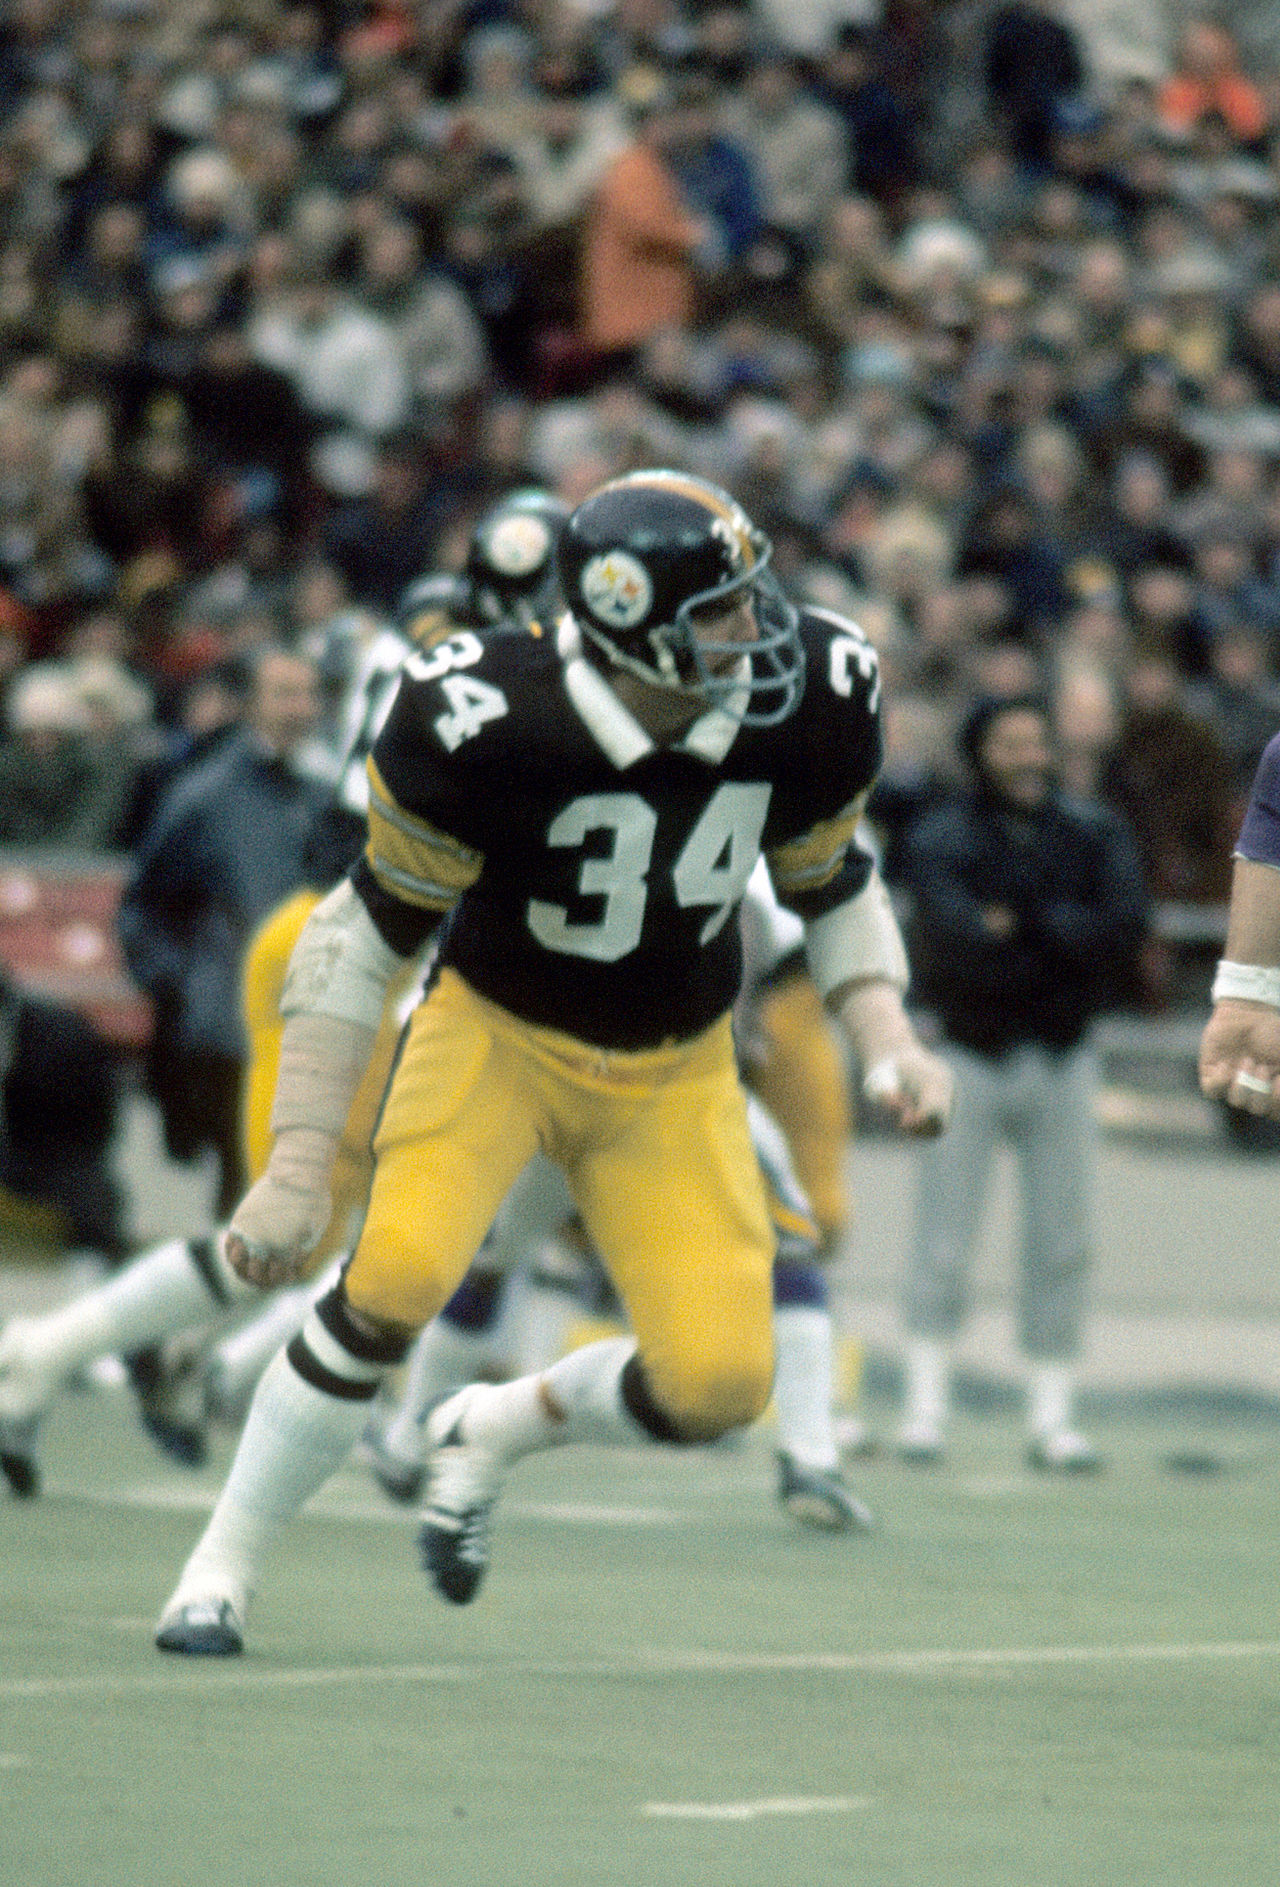 Catch up with Steelers legend Andy Russell on this segment of Thursday Night Tailgate.